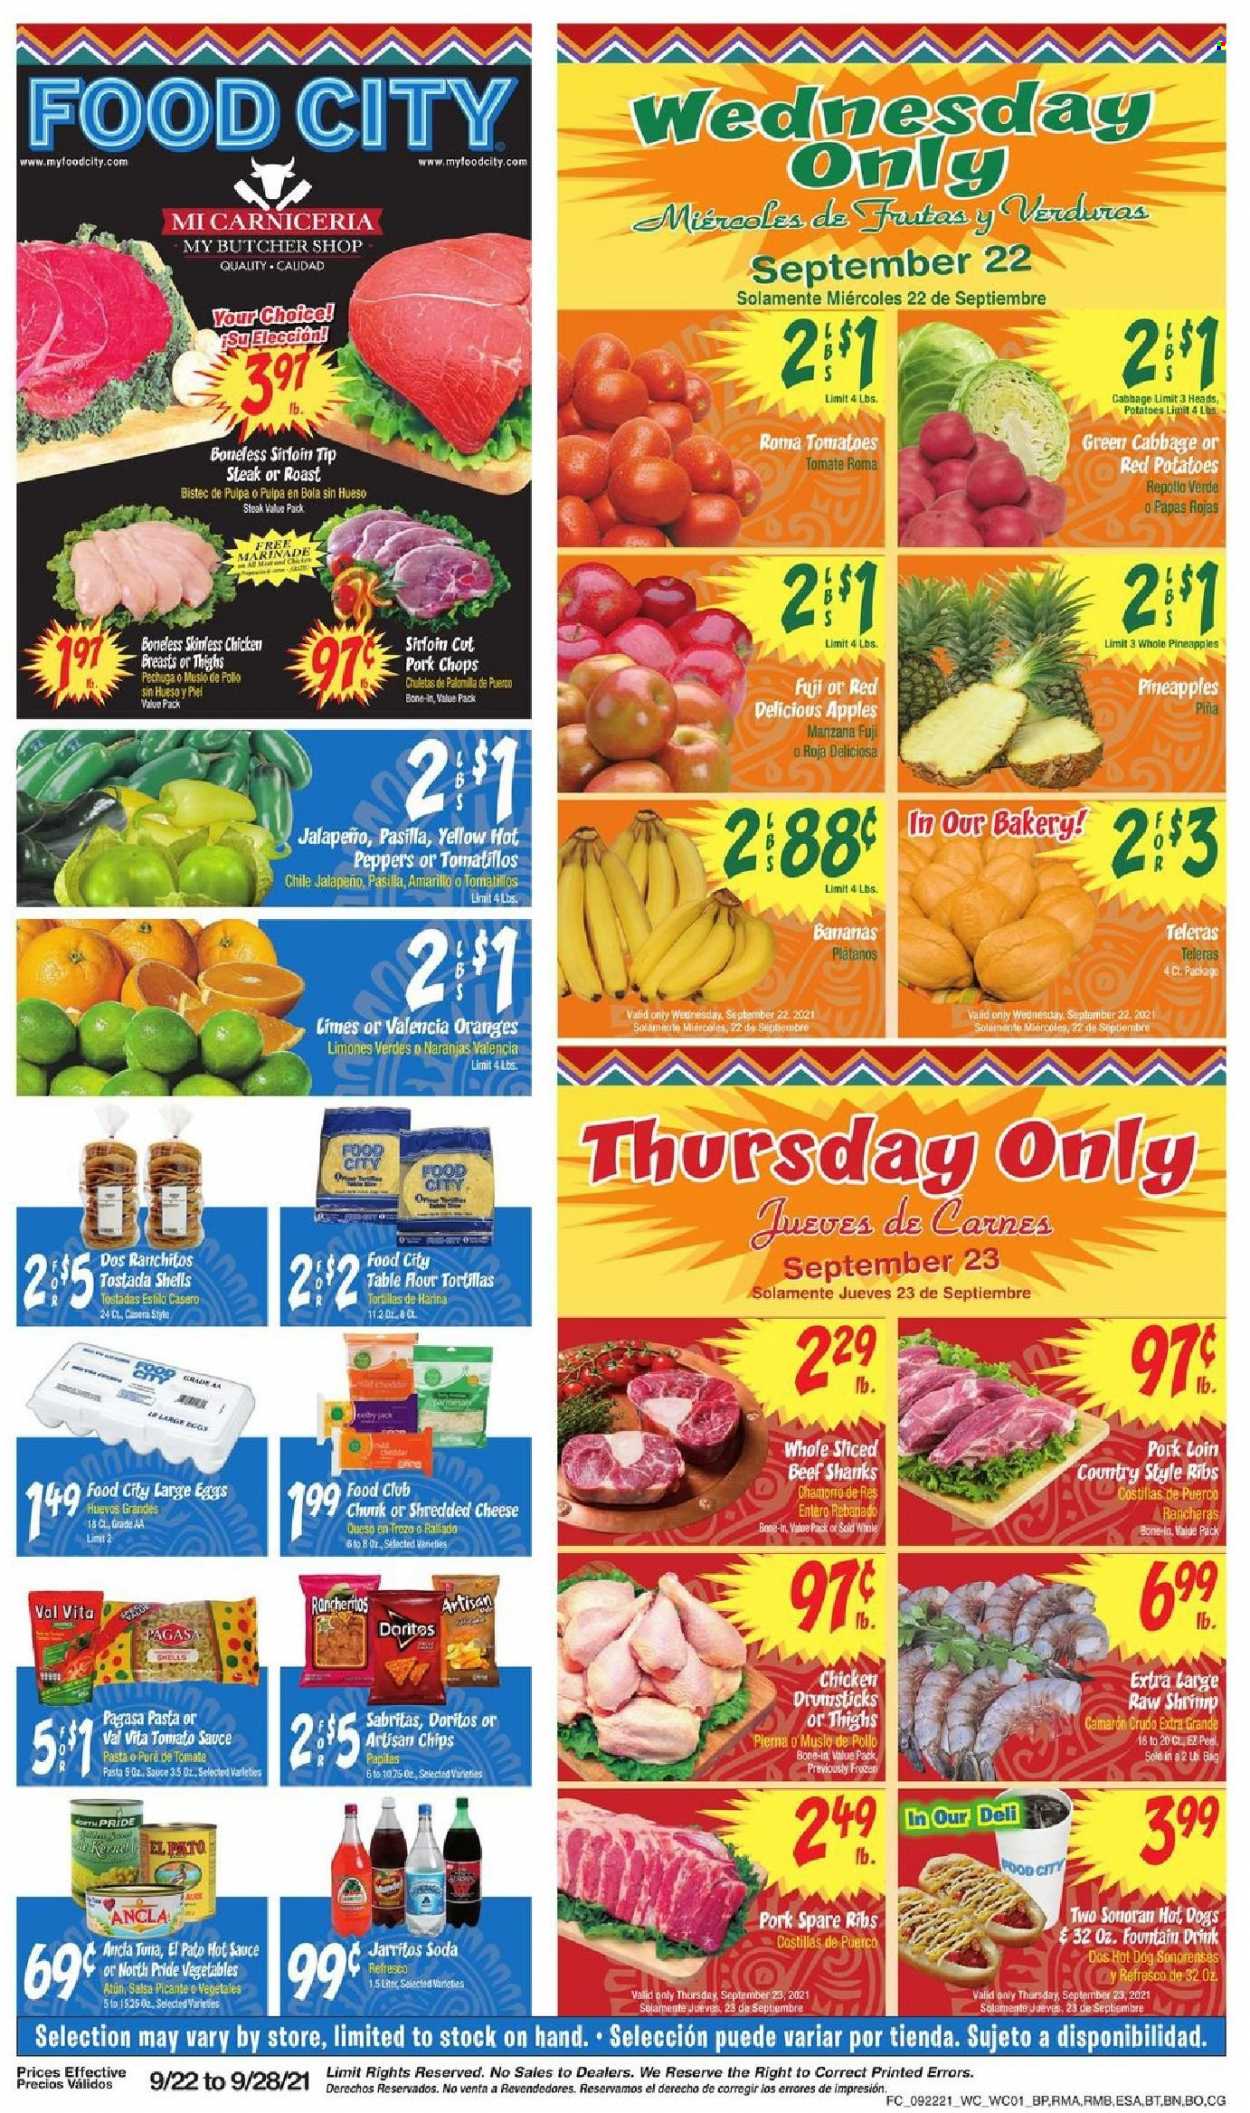 thumbnail - Food City Flyer - 09/22/2021 - 09/28/2021 - Sales products - tortillas, tostadas, tomatillo, tomatoes, potatoes, peppers, jalapeño, red potatoes, apples, bananas, limes, Red Delicious apples, pineapple, oranges, hot dog, shredded cheese, large eggs, Doritos, tomato sauce, hot sauce, salsa, marinade, soda, steak, pork chops, pork loin, pork meat, pork ribs, pork spare ribs, country style ribs, pasilla. Page 1.